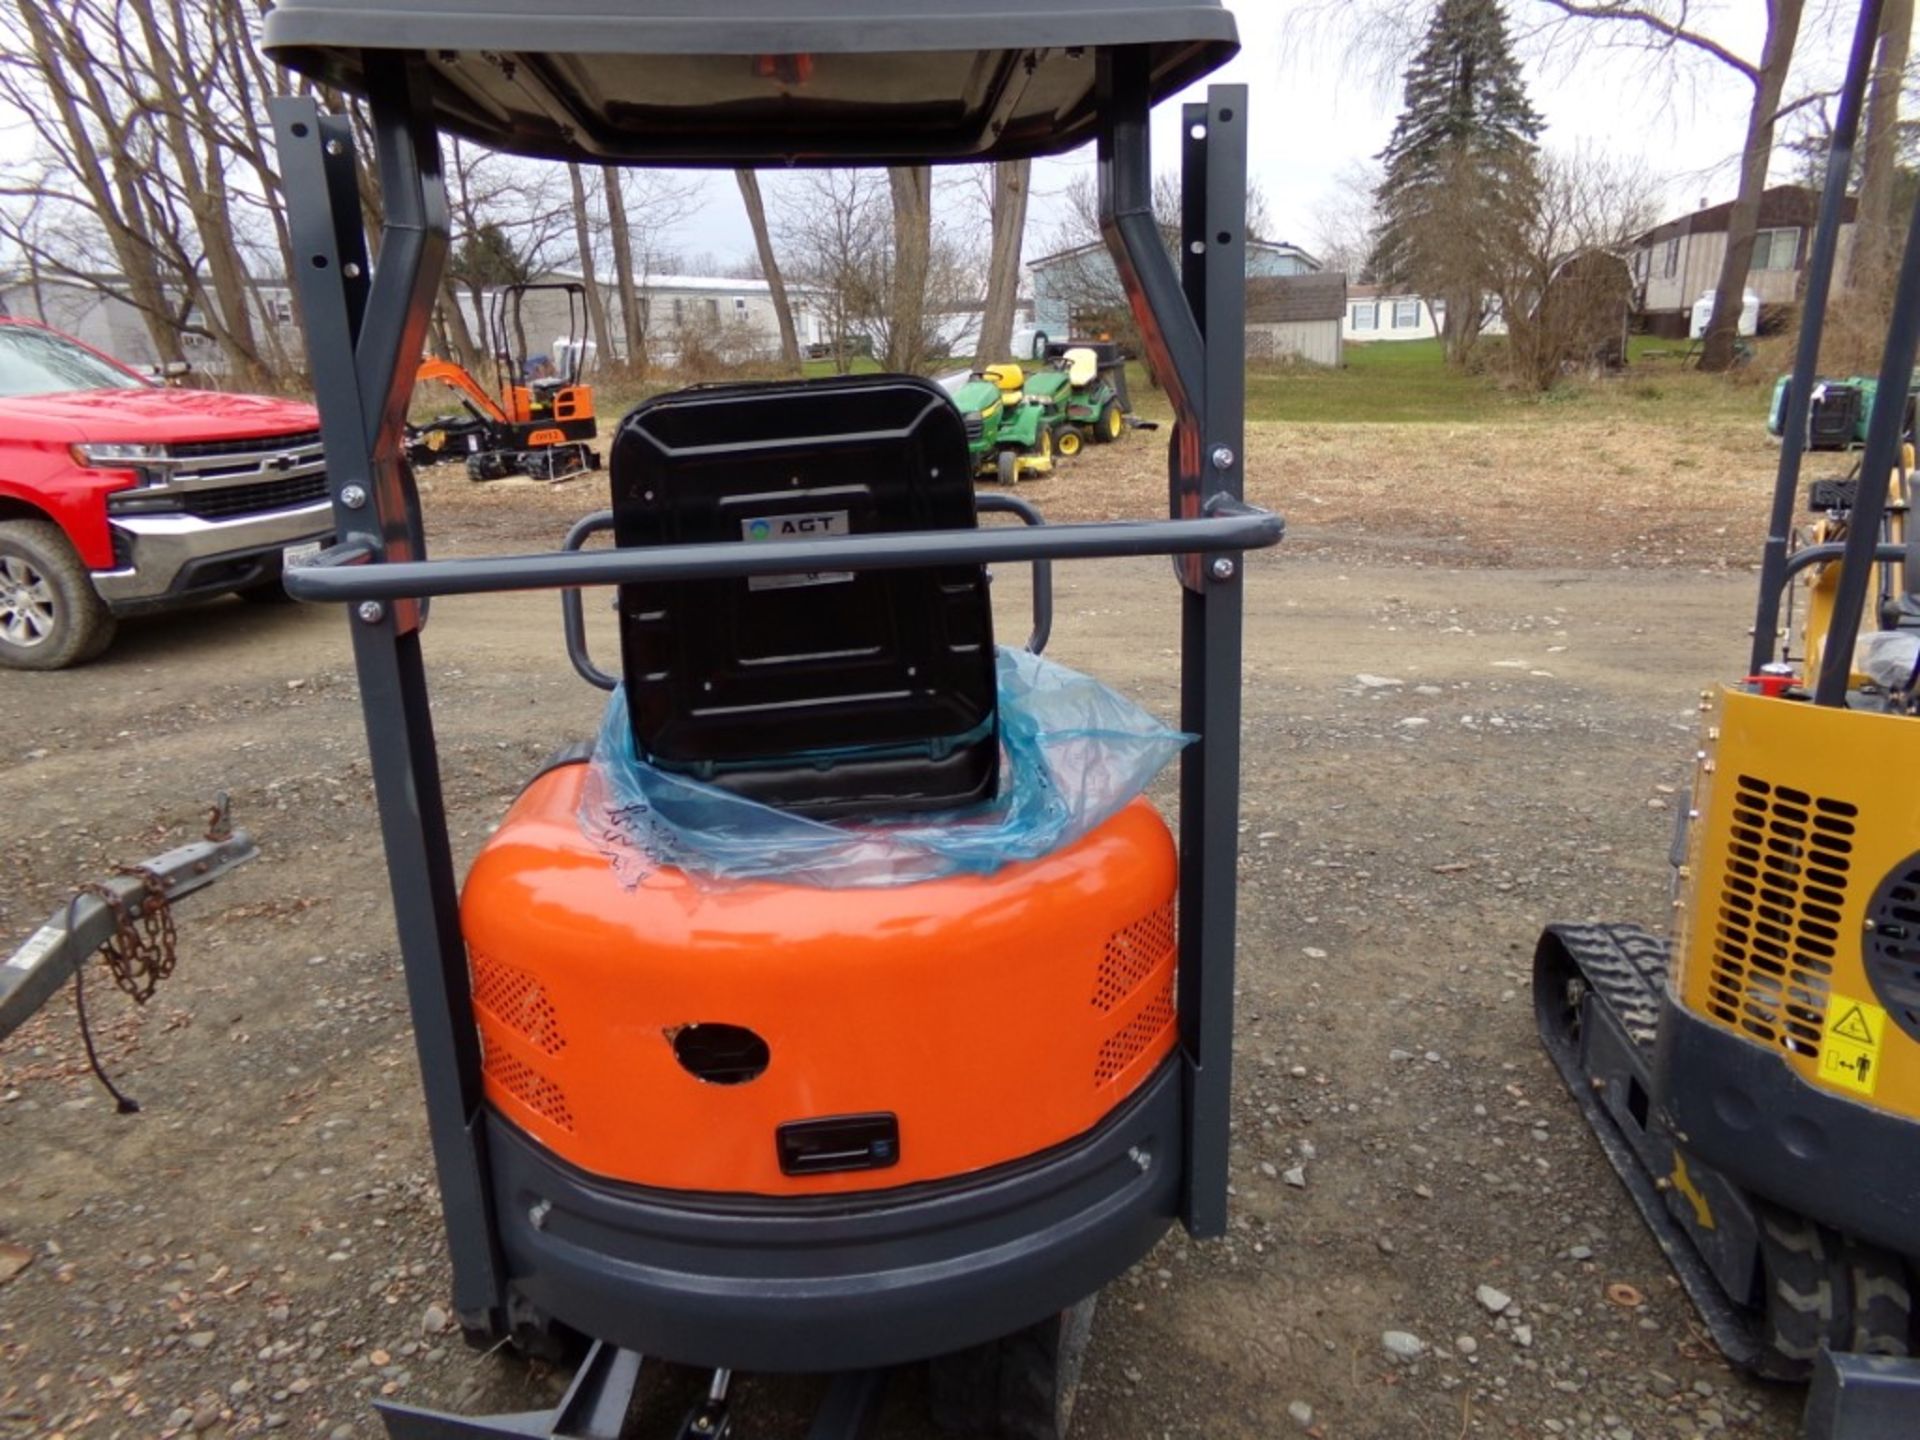 New AGT L12 Mini Excavator with Canopy, Has Manual Thumb, Orange, Ser # 633466 - Image 3 of 4